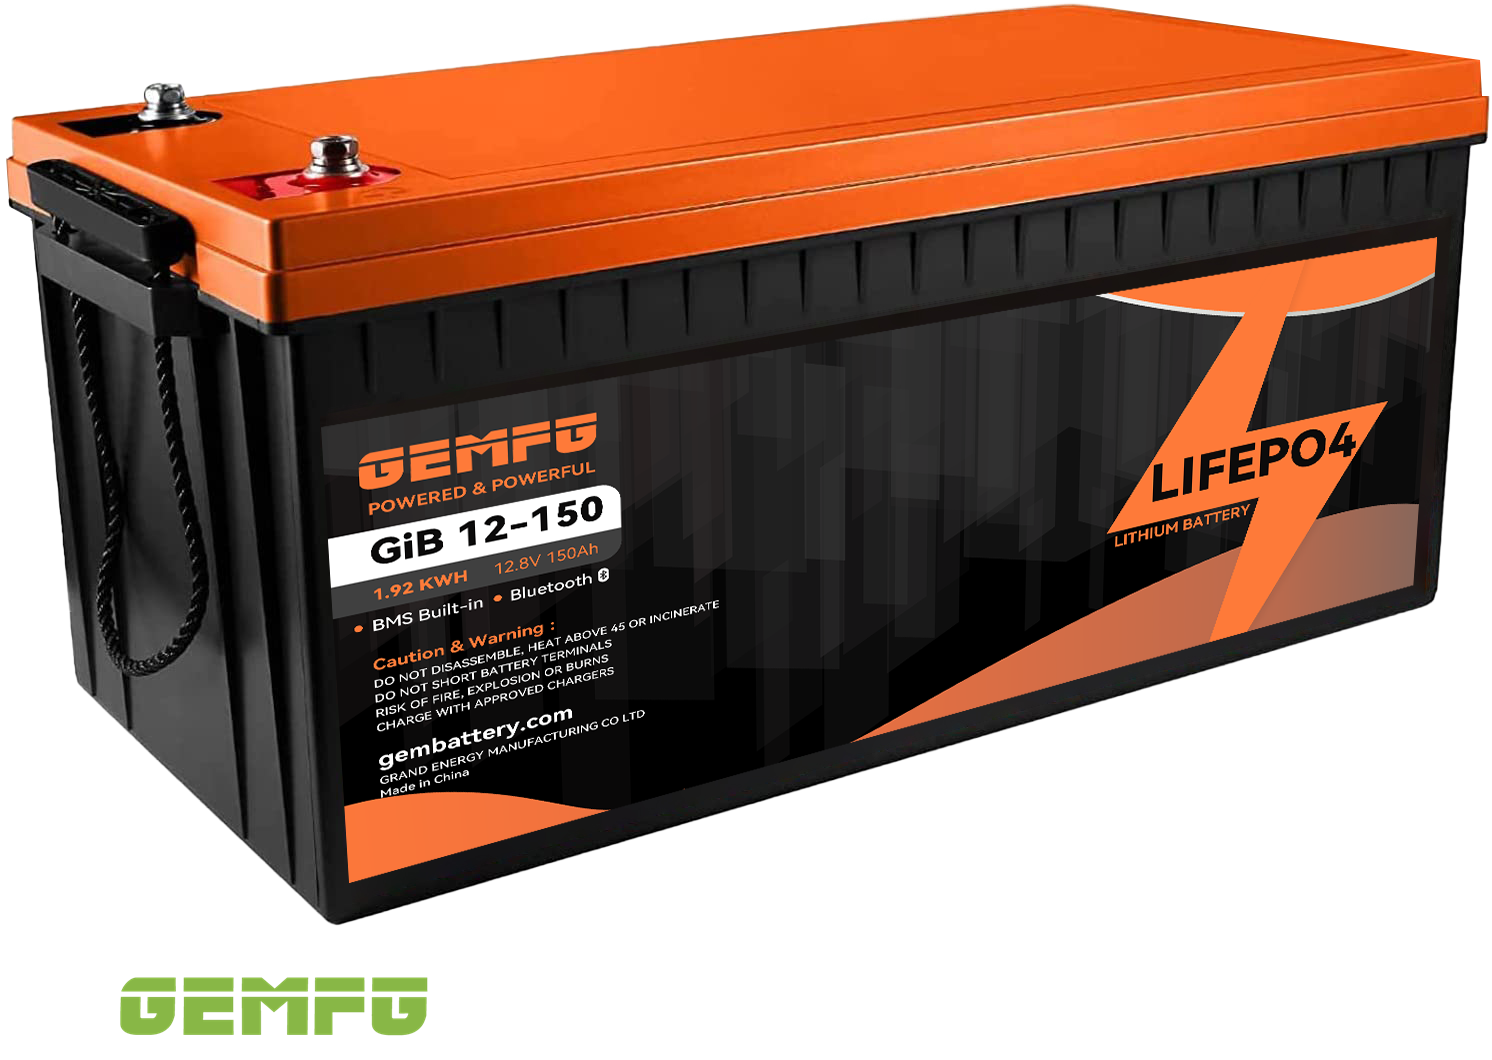 24V 230ah LiFePO4 Battery Built-in 150A BMS with Bluetooth ship